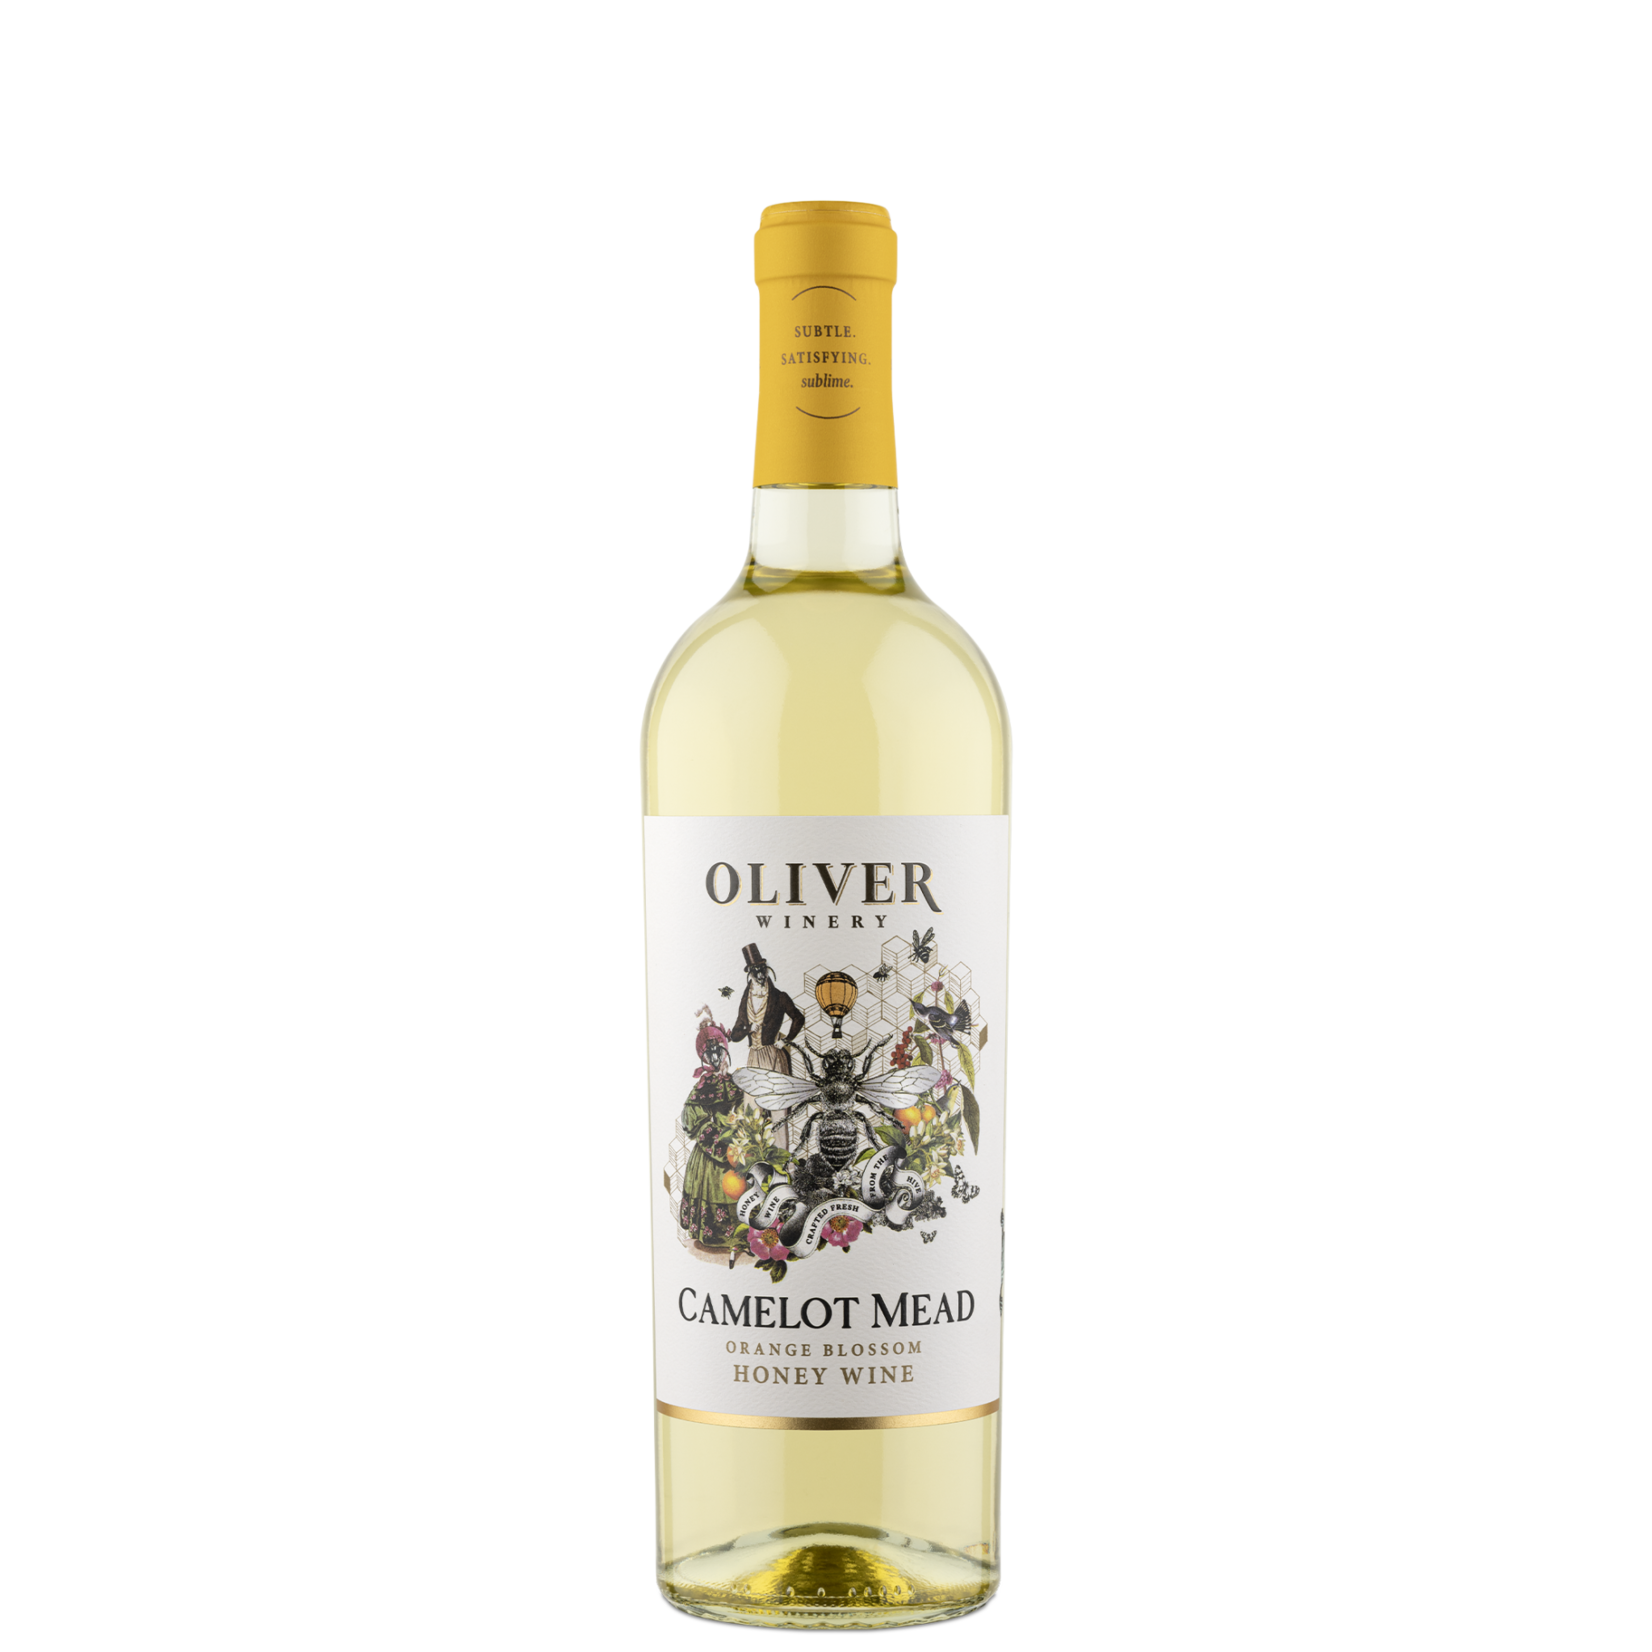 Oliver Winery Camelot Mead Orange Blossom Honey Wine